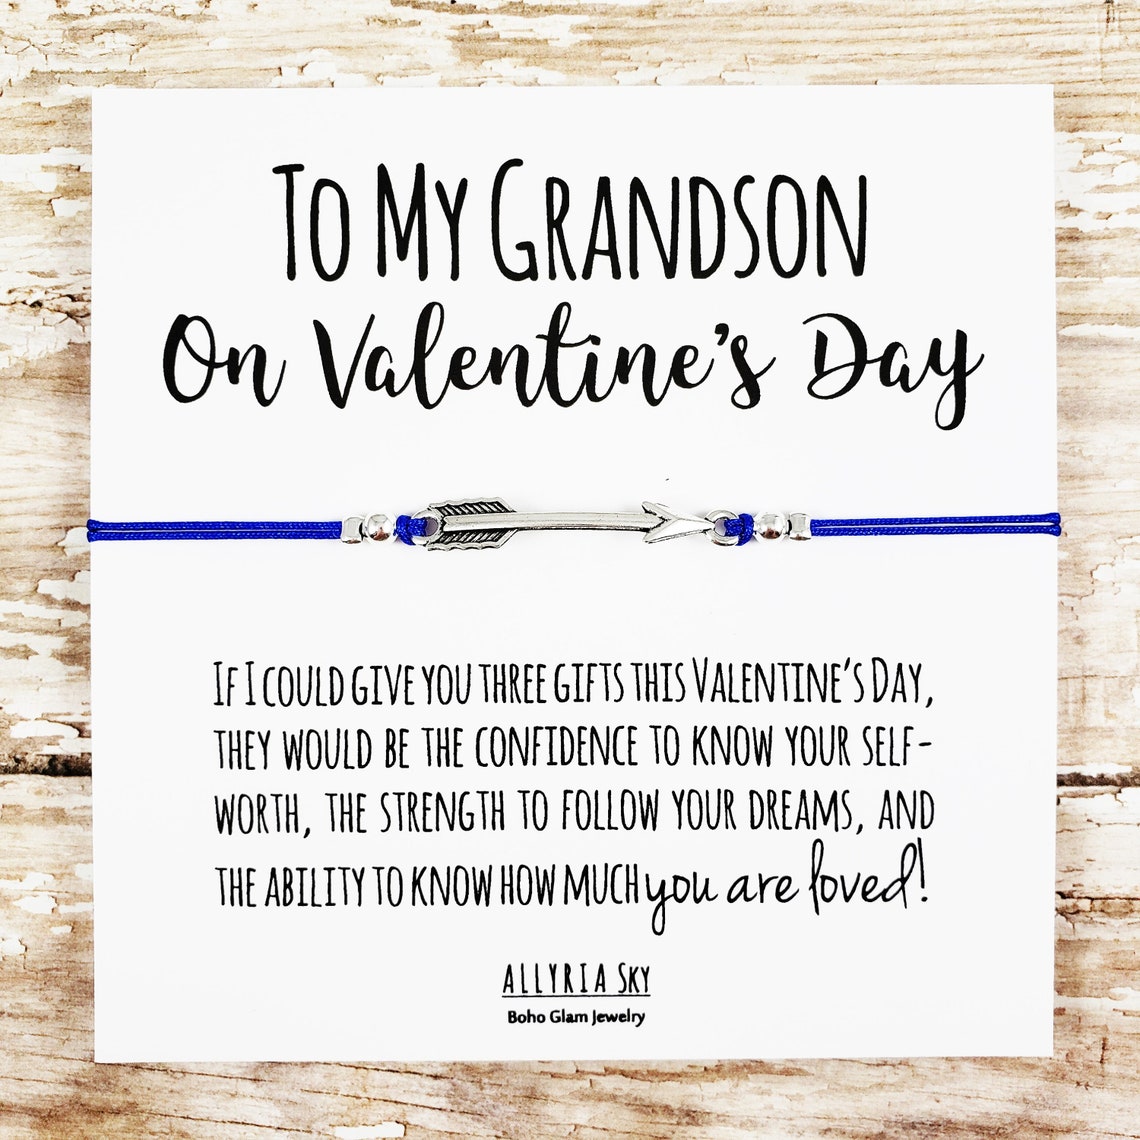 valentine-s-day-greeting-card-for-young-grandson-grandson-here-s-a